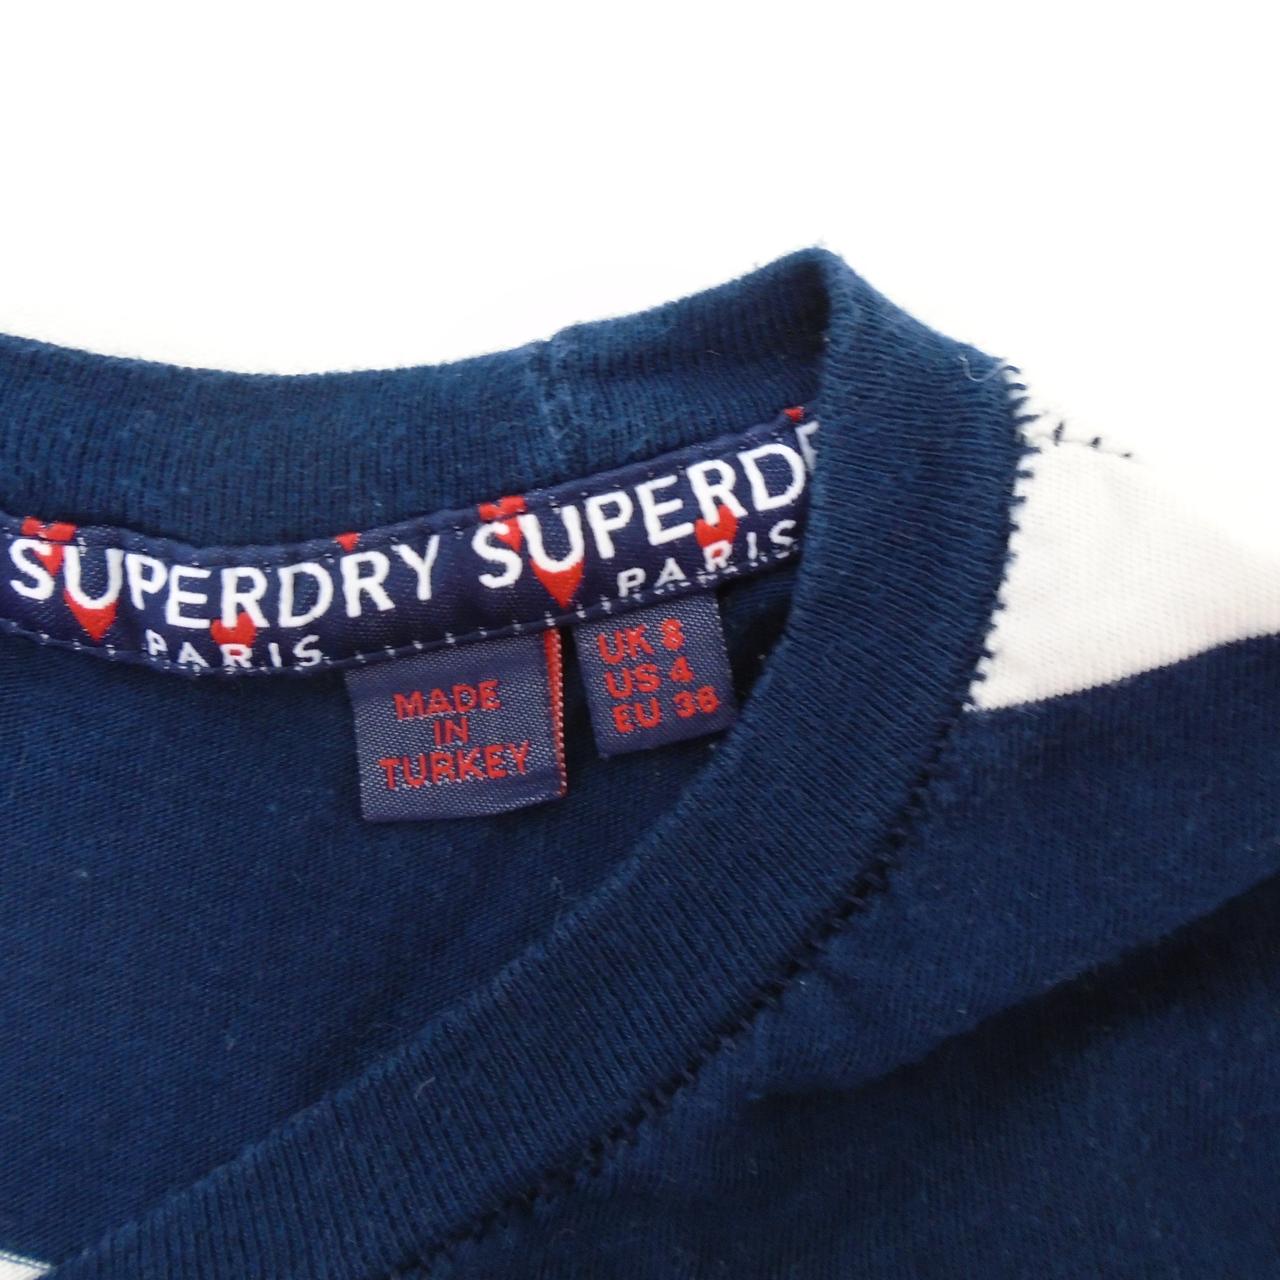 Women's Dress Superdry. Multicolor. M. Used. Good